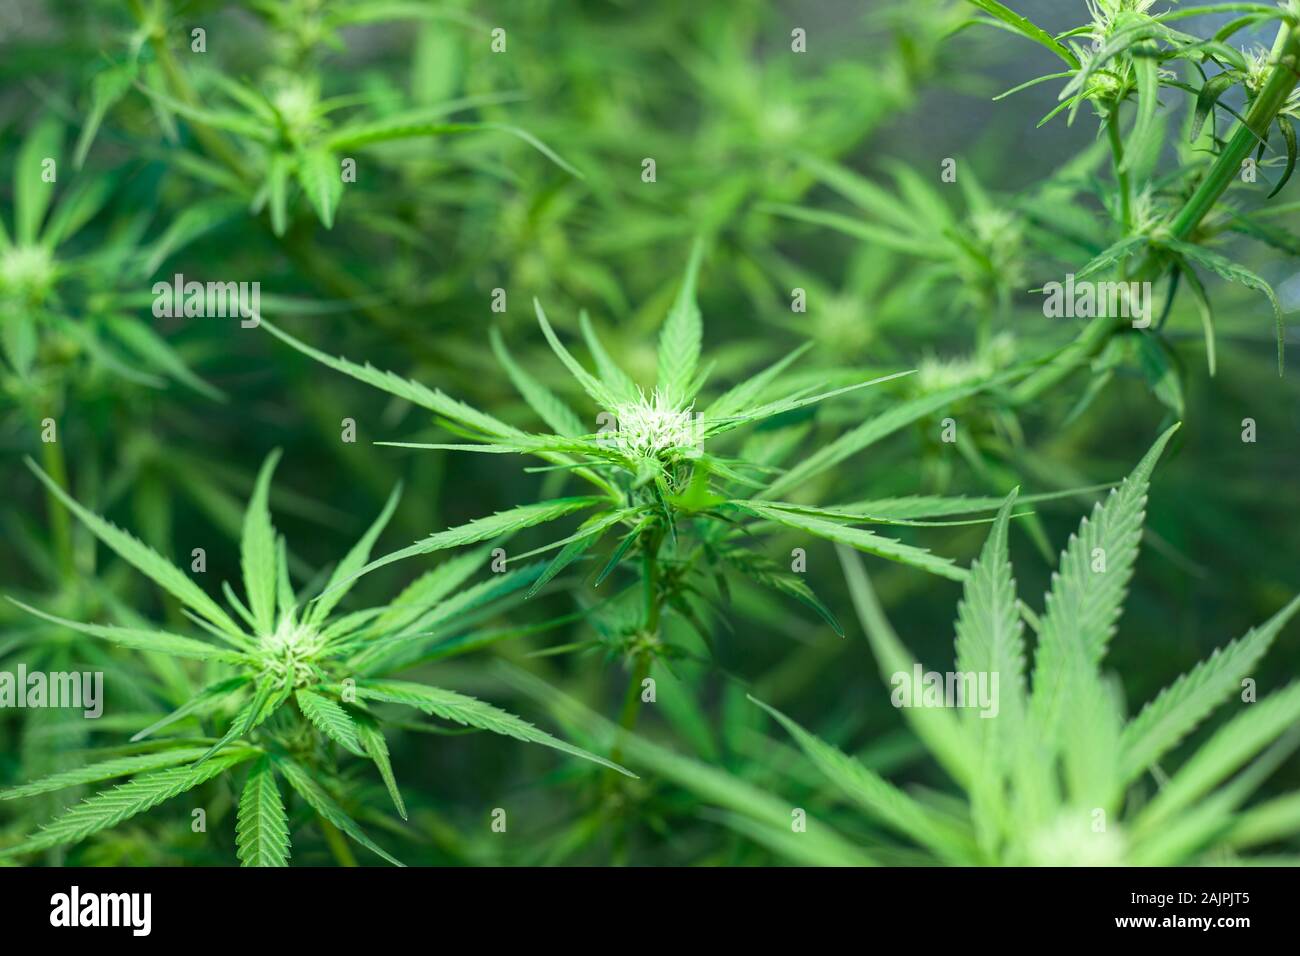 beautiful green flowers of blooming cannabis buds. concept: medical marijuana plant. Stock Photo